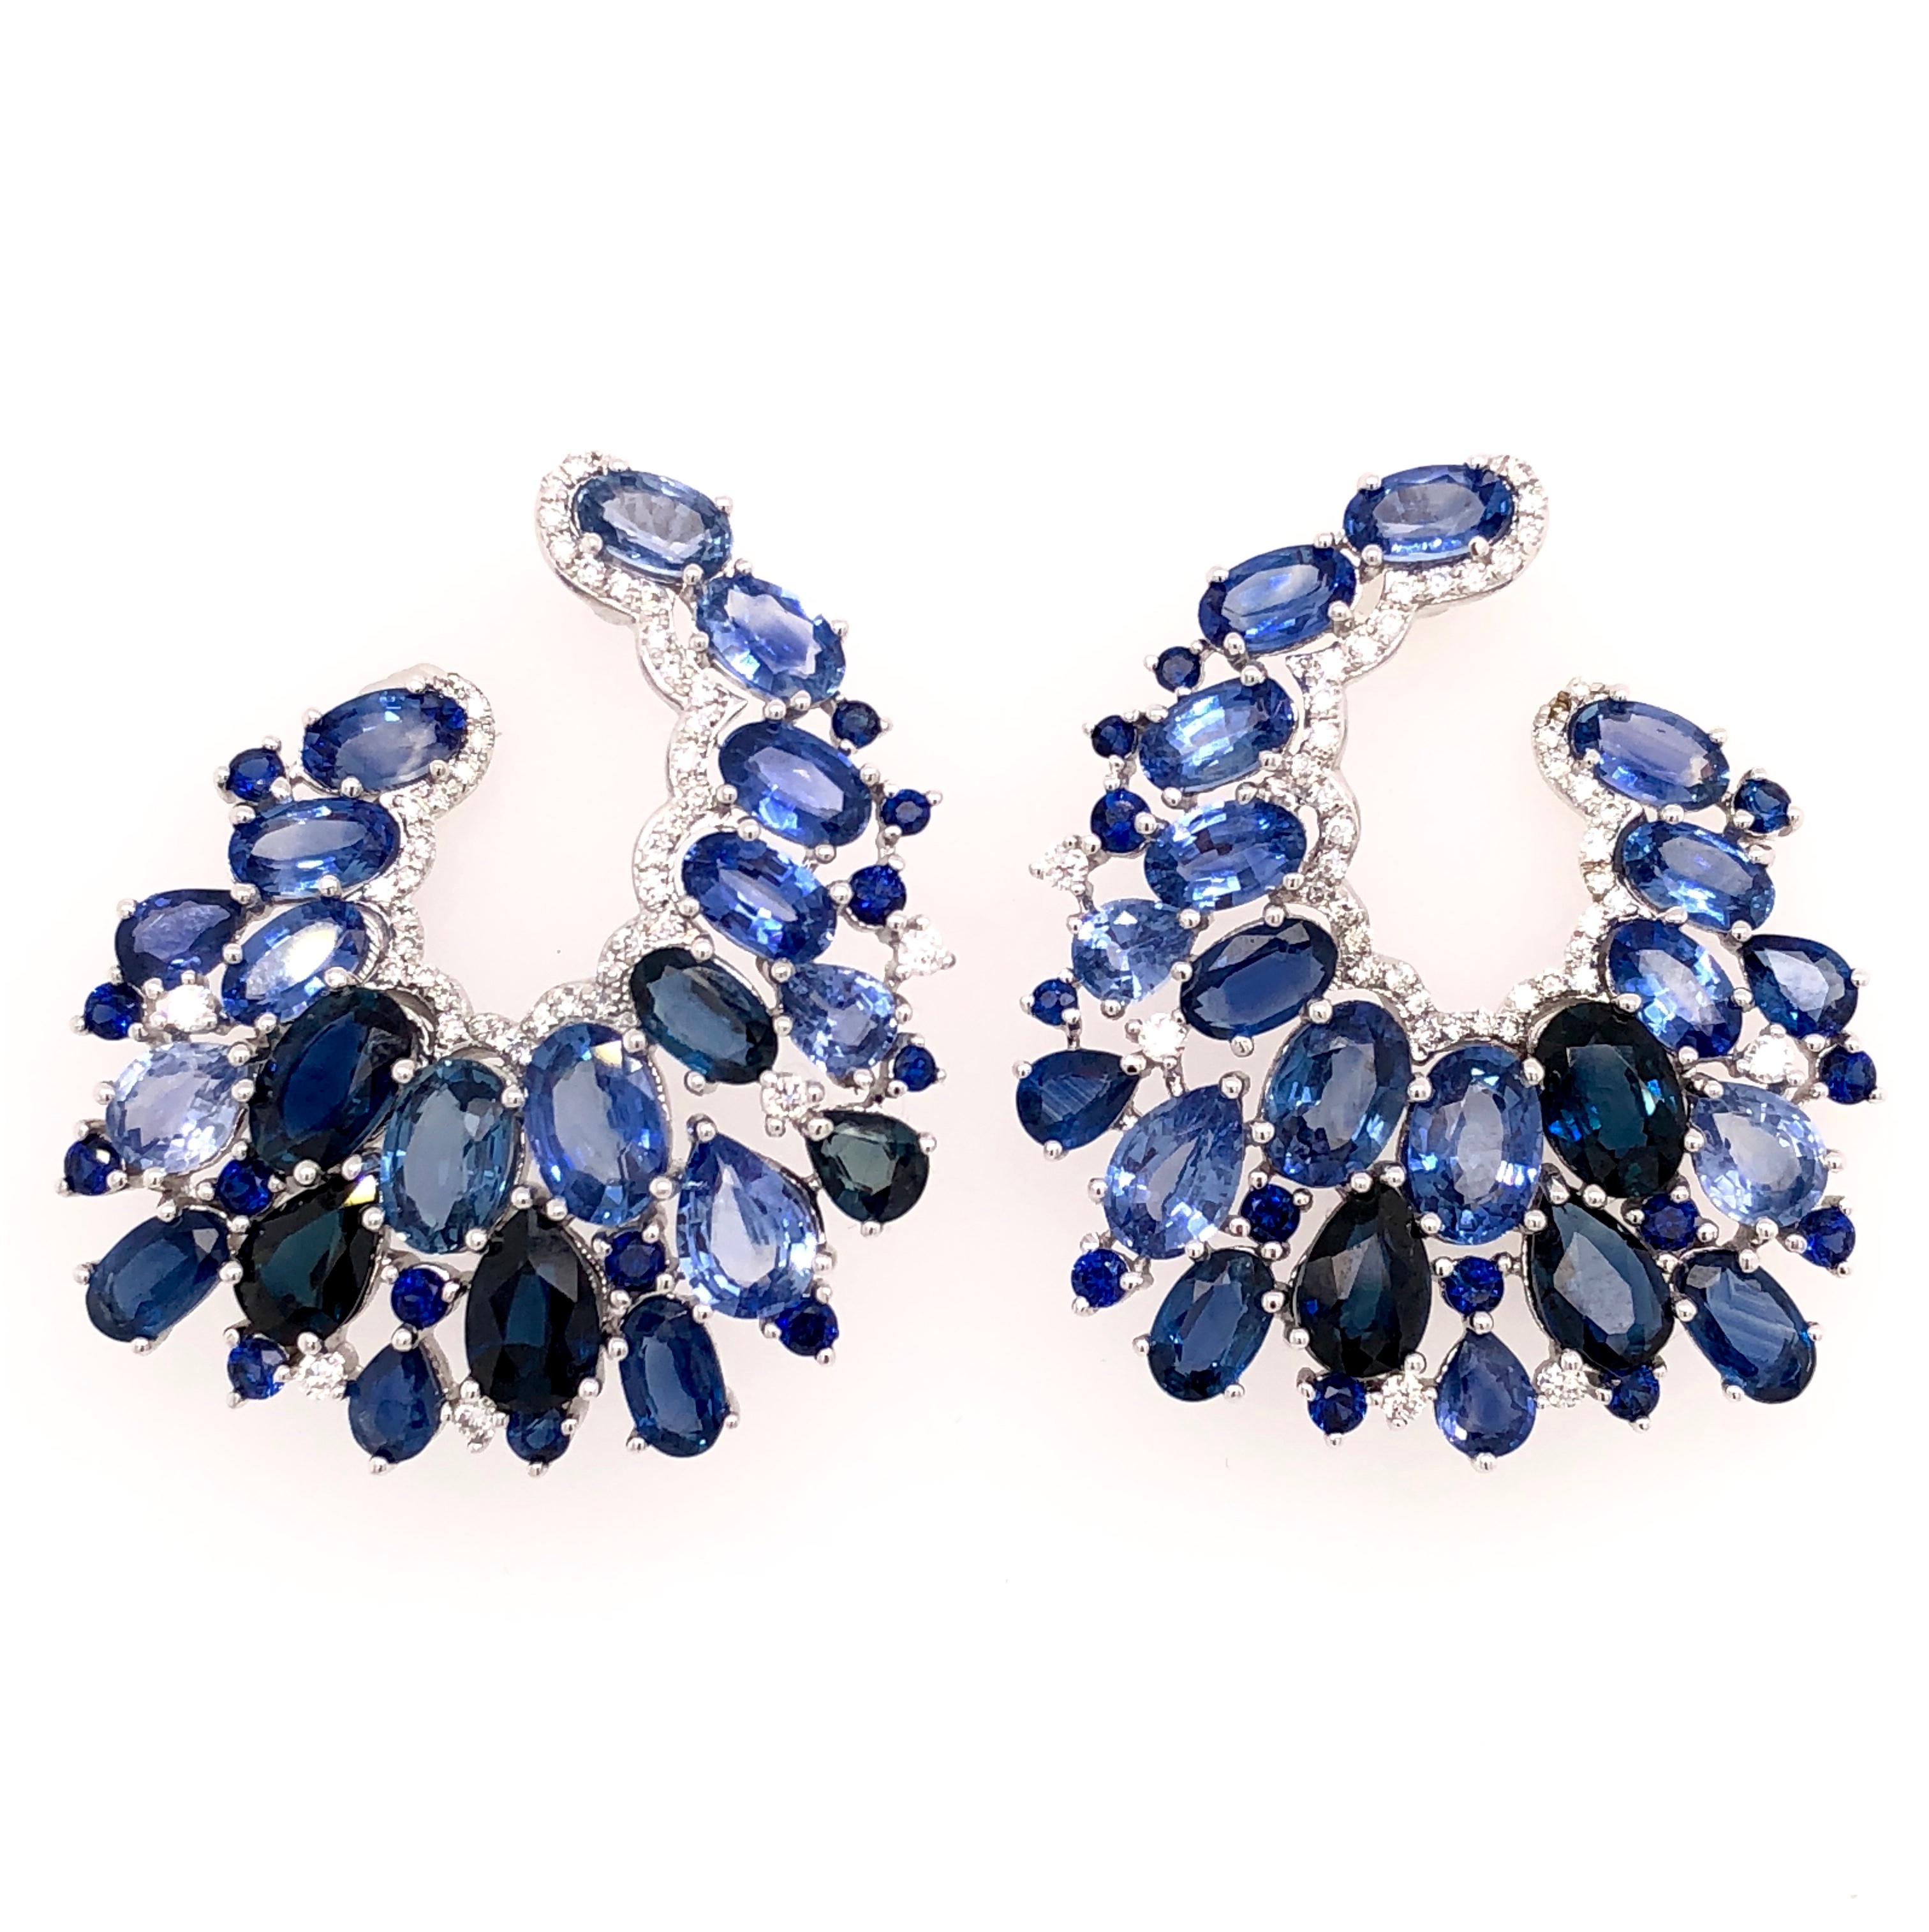 Midnight Blue Collection 

Oval blue Sapphire and Diamond C shaped earrings set in 18K white gold.

Sapphire: 14.49ct total weight.
Diamonds: 0.36ct total weight.
All diamonds are G-H/SI stones.
Height - is approximately 3cm/1.18inches.
Width - is